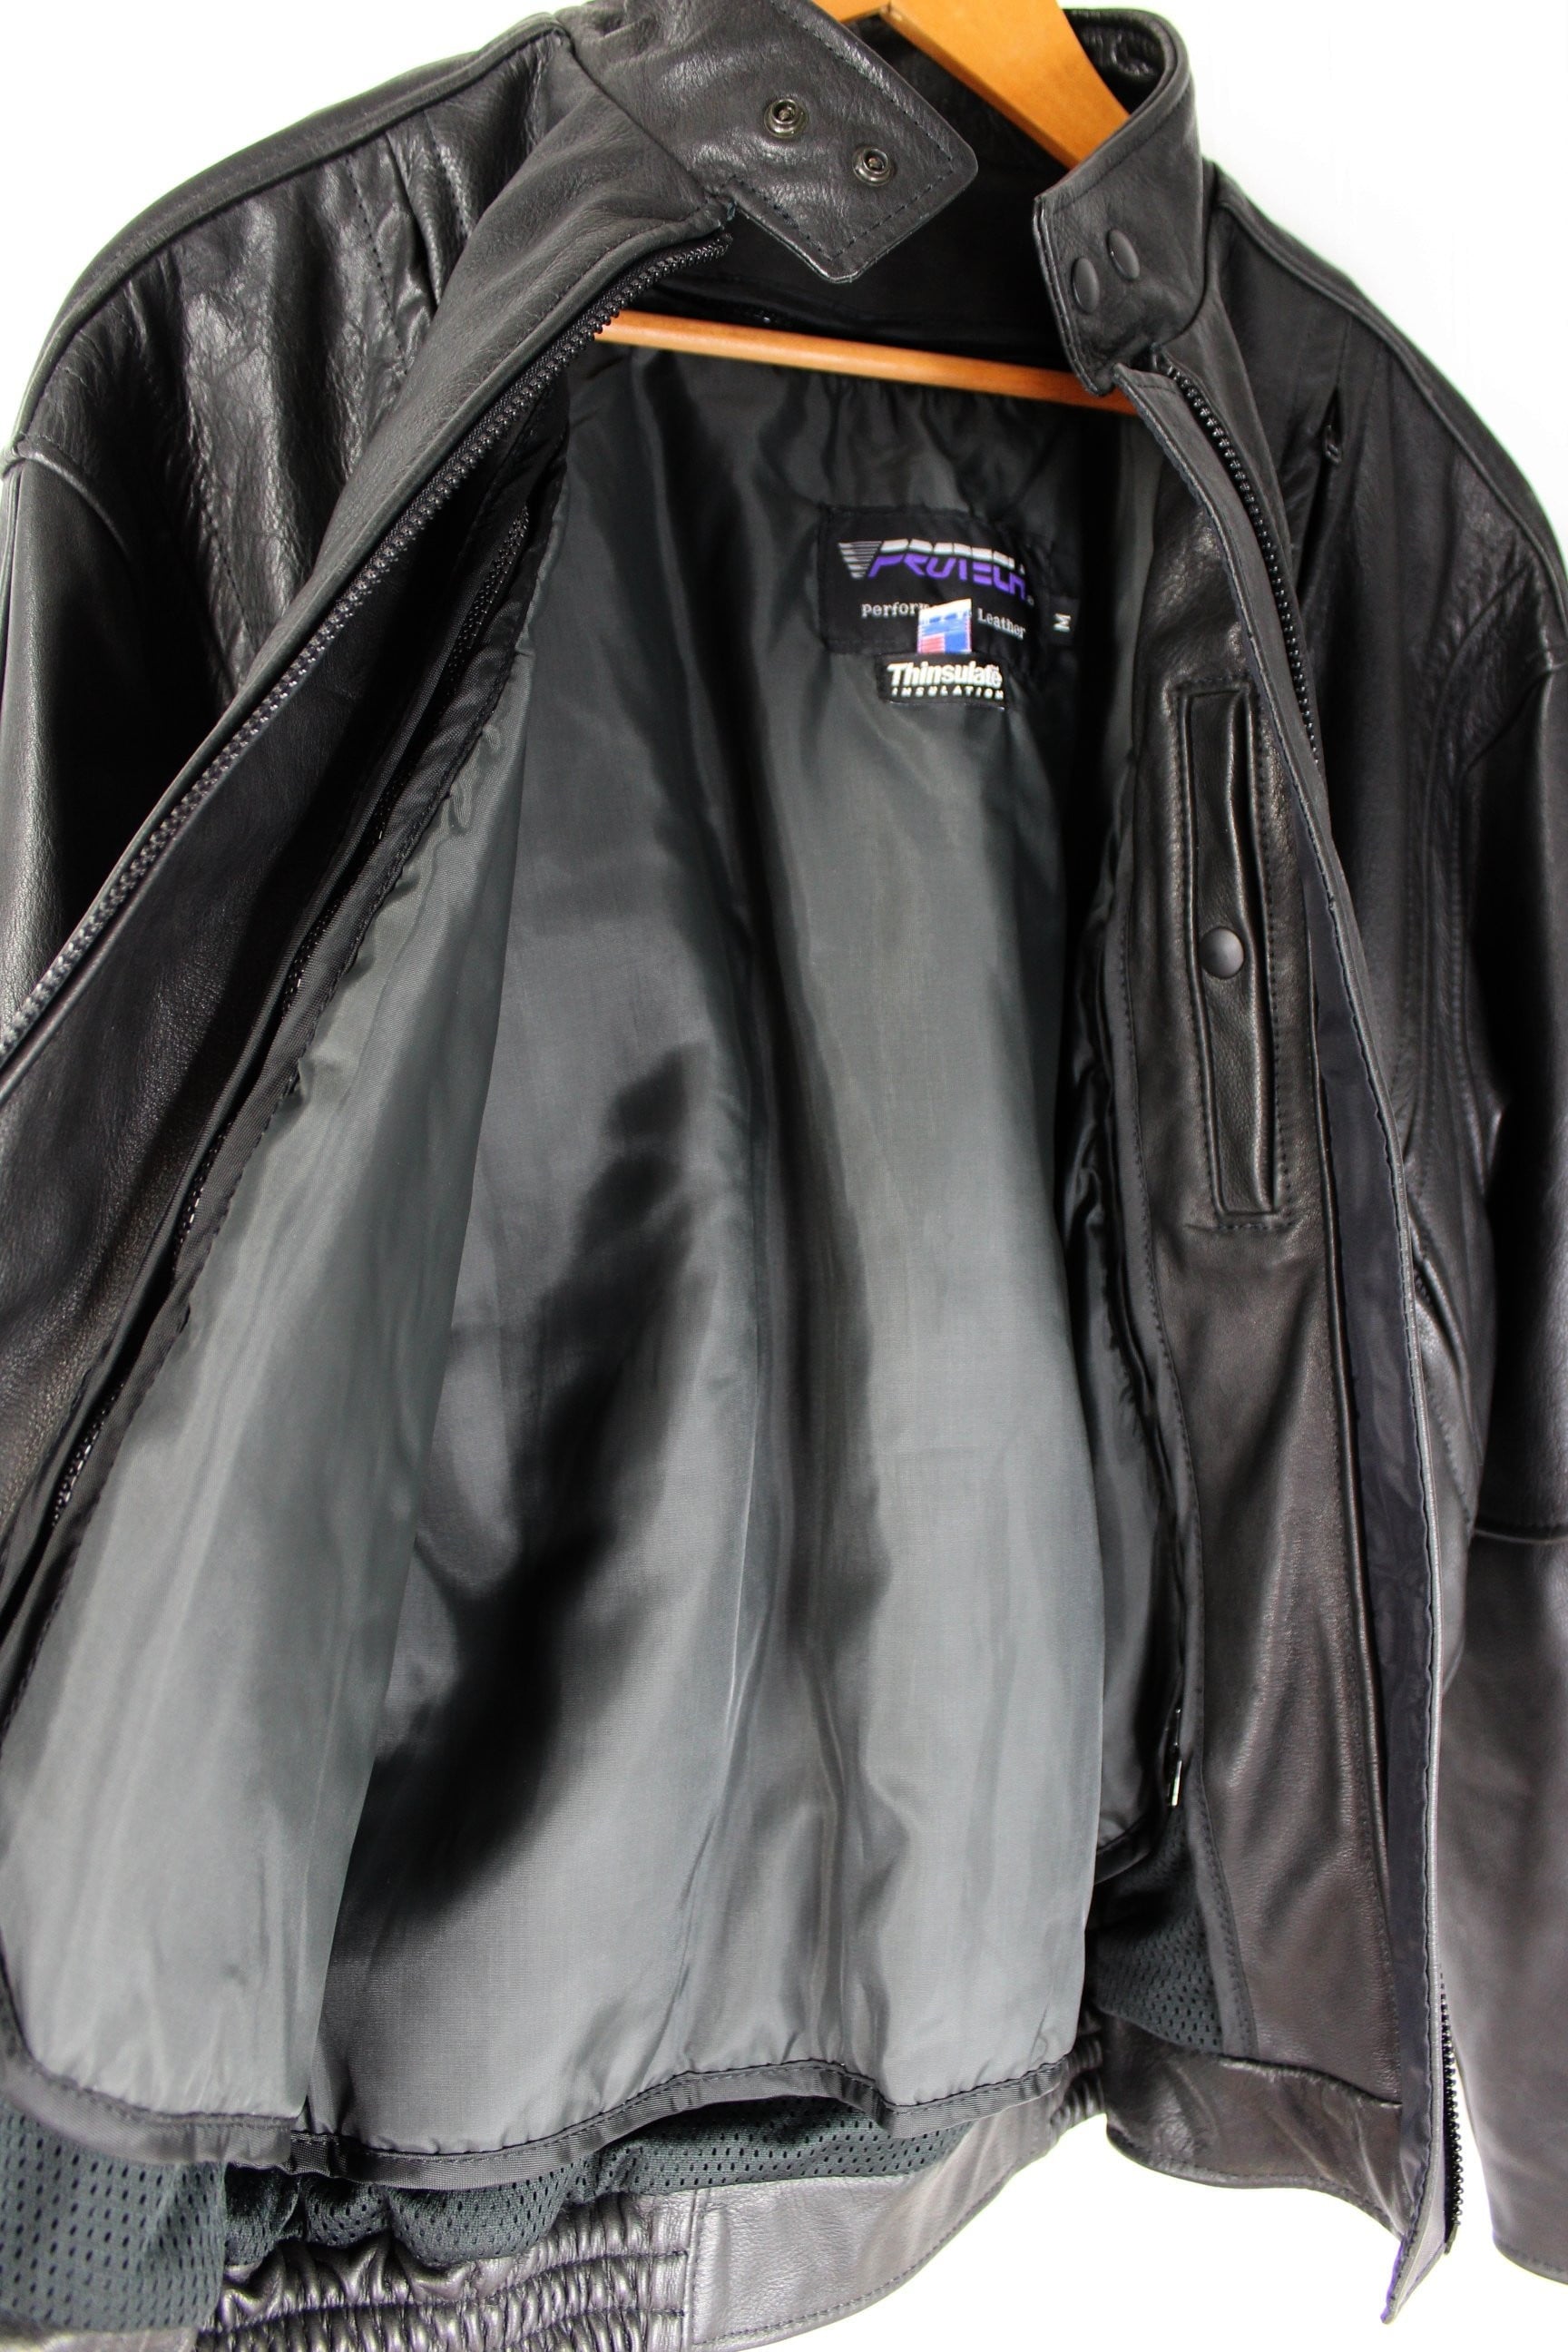 Protech USA Performance Leather Black Motorcycle Jacket M Vintage - Th